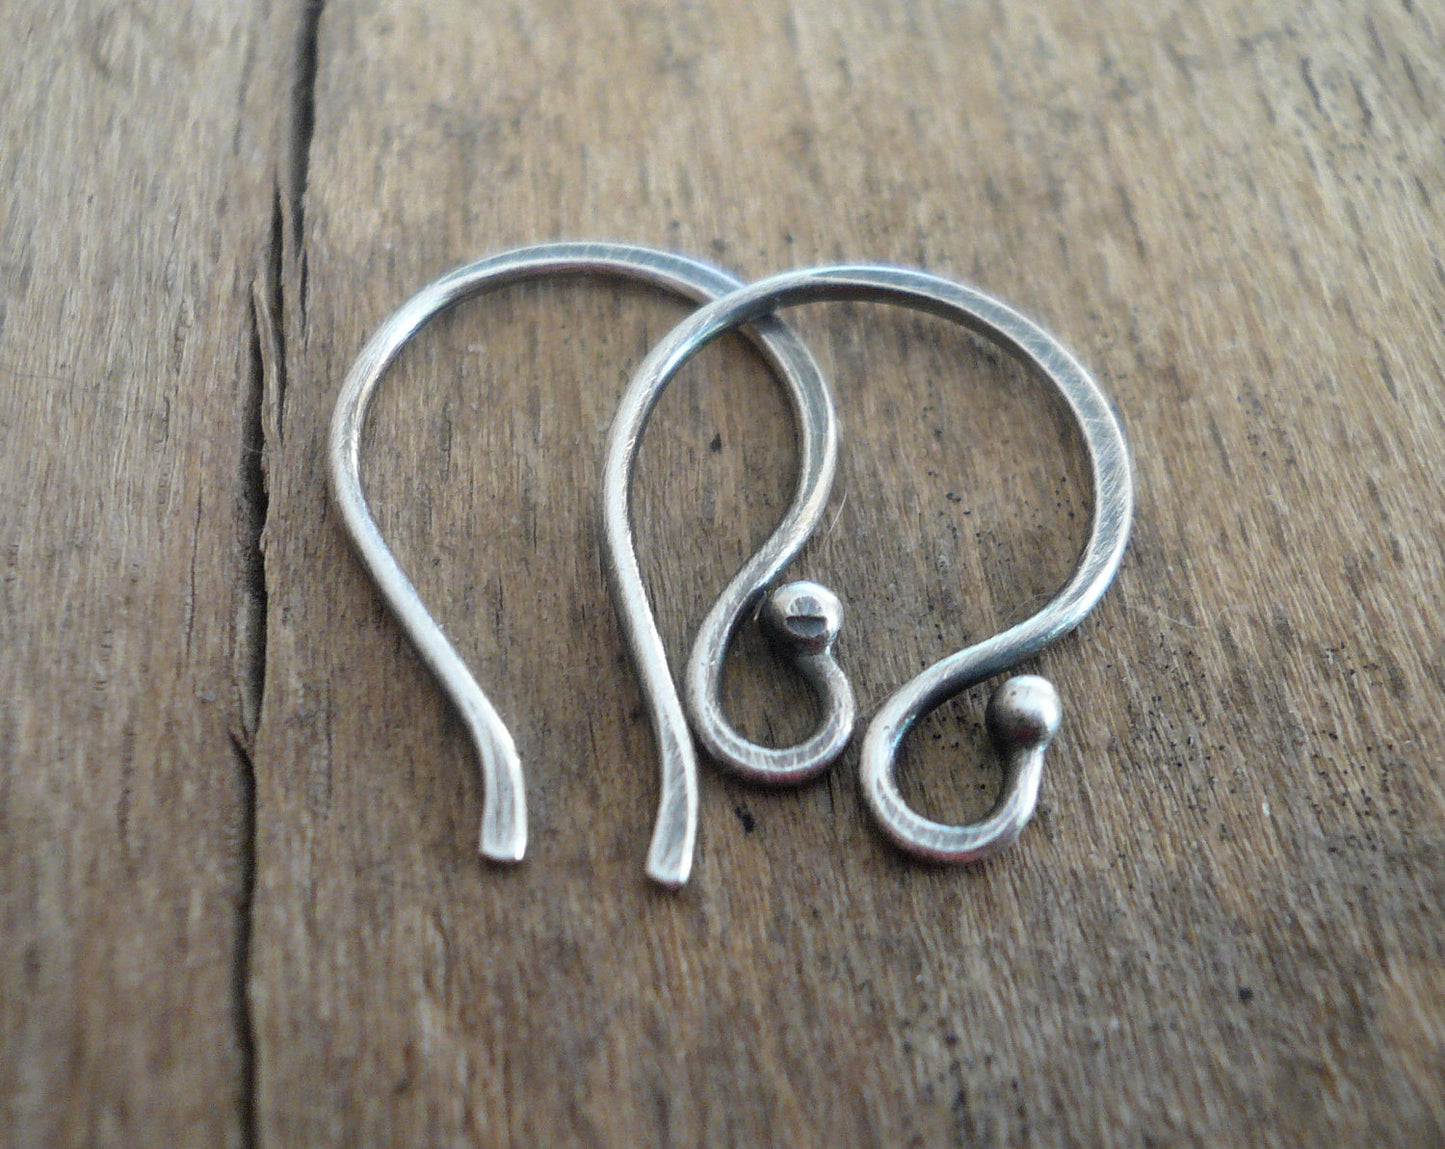 12 pairs Ball End Twinkle Fine Silver Earwires - Handmade. Handforged. Oxidized & polished